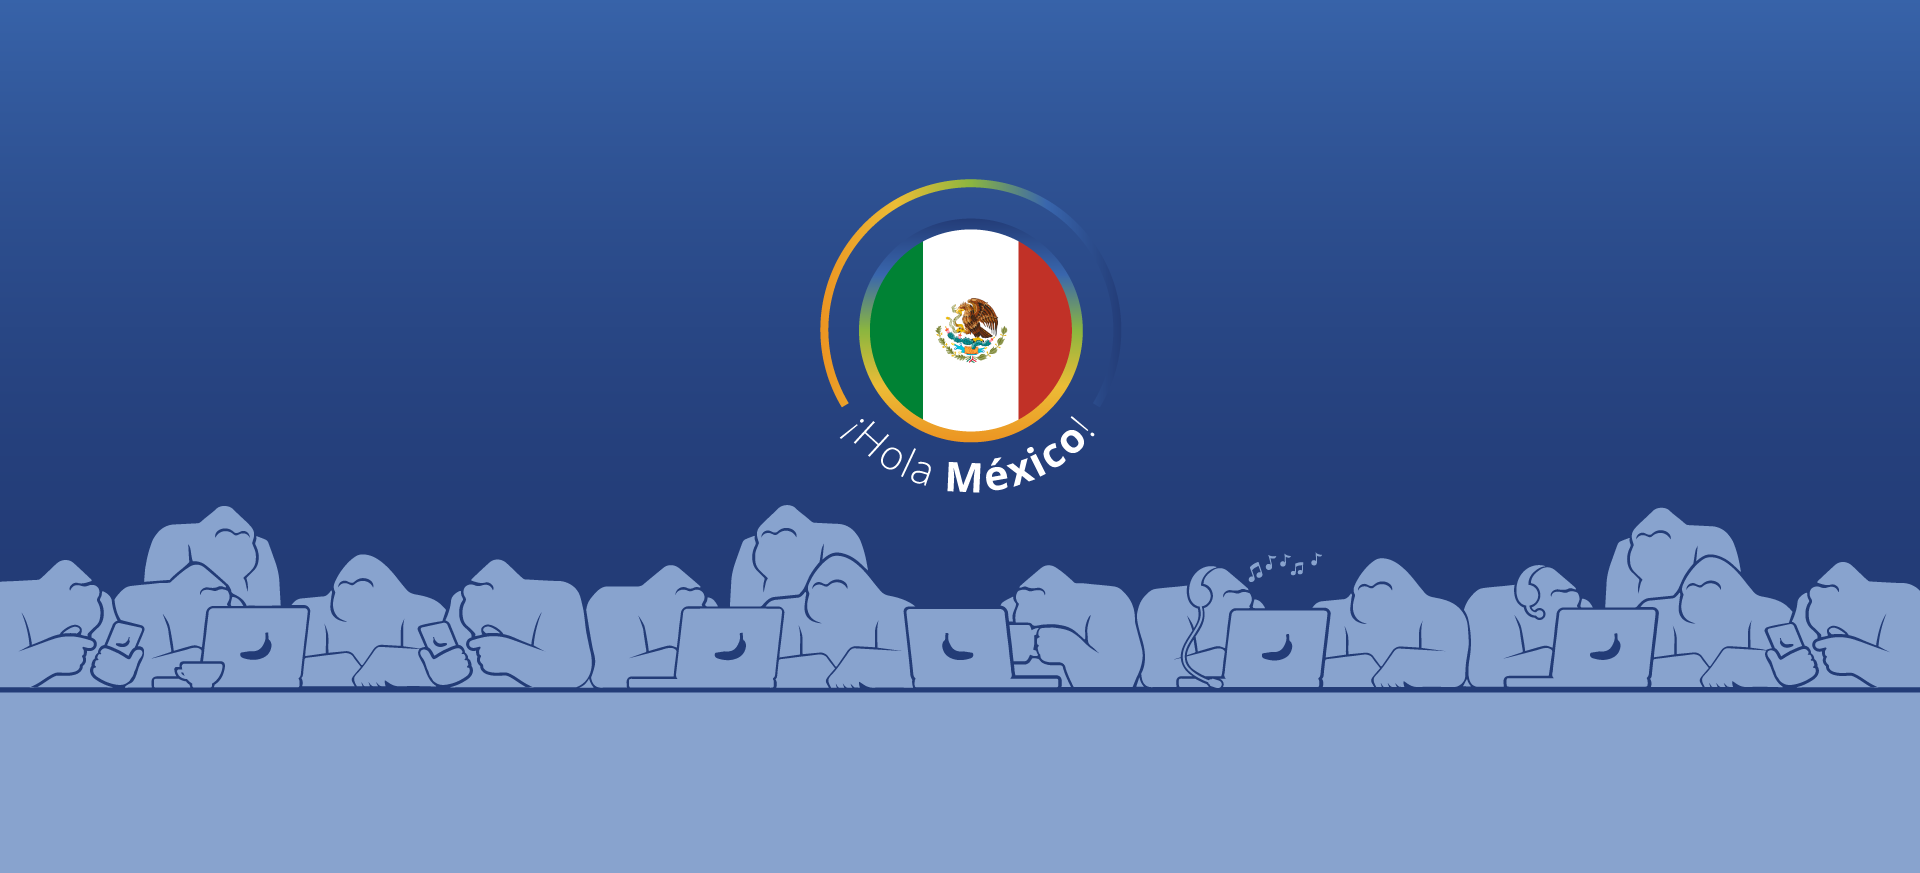 Why Outsource to Mexico: 4 Key Advantages